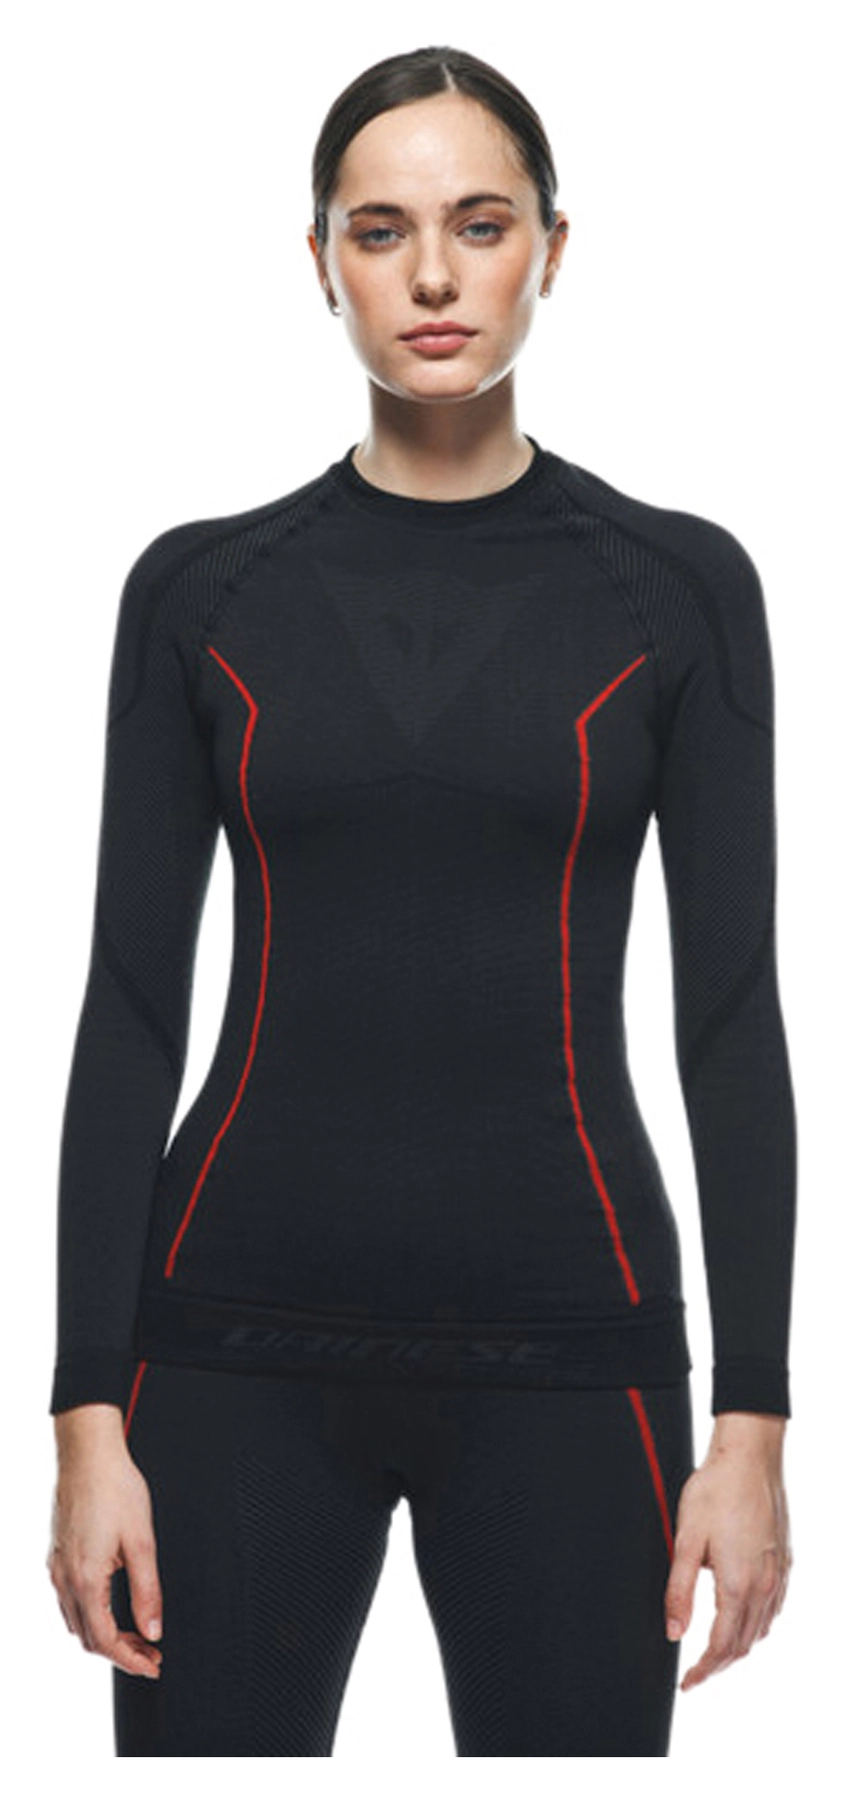 DAINESE THERMO LS LADY